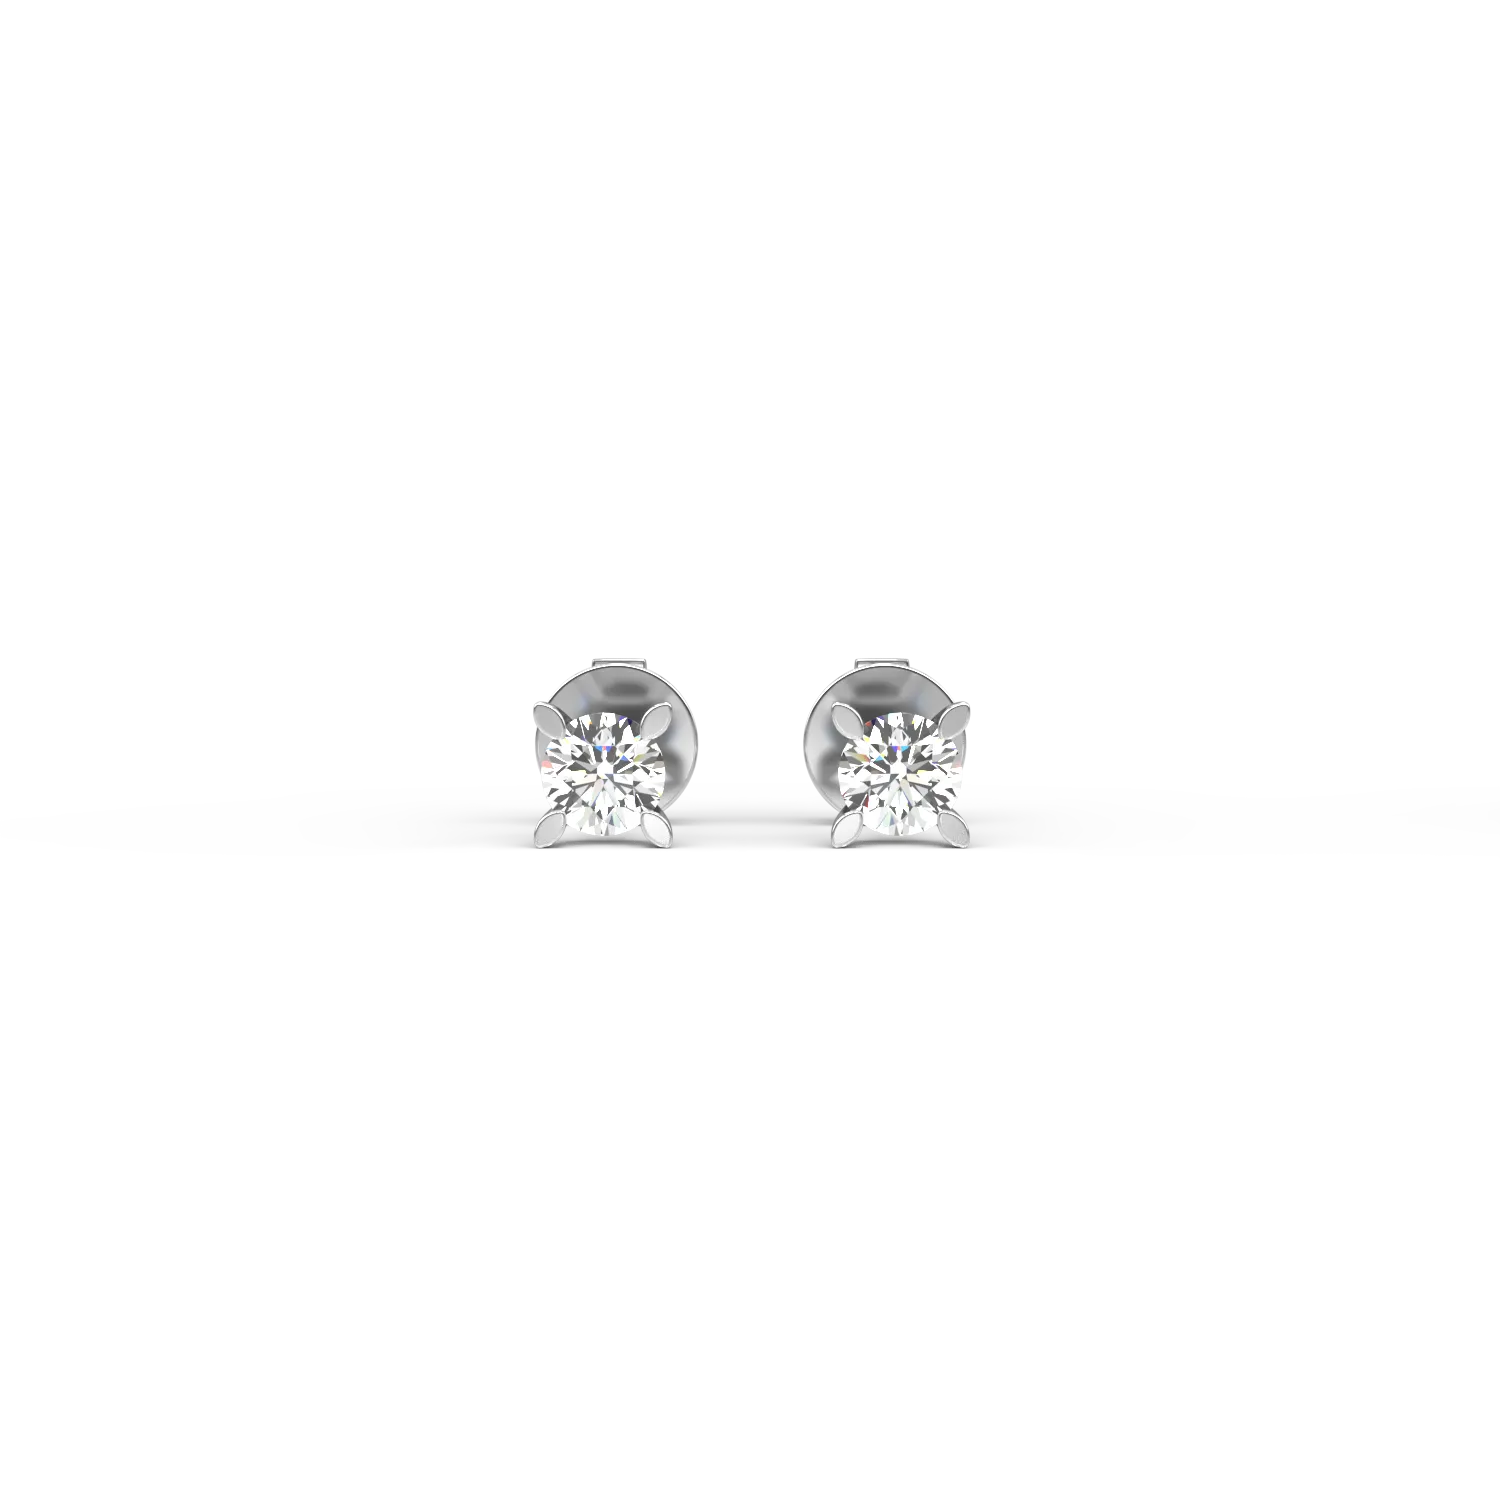 White gold earrings with 0.2ct diamonds